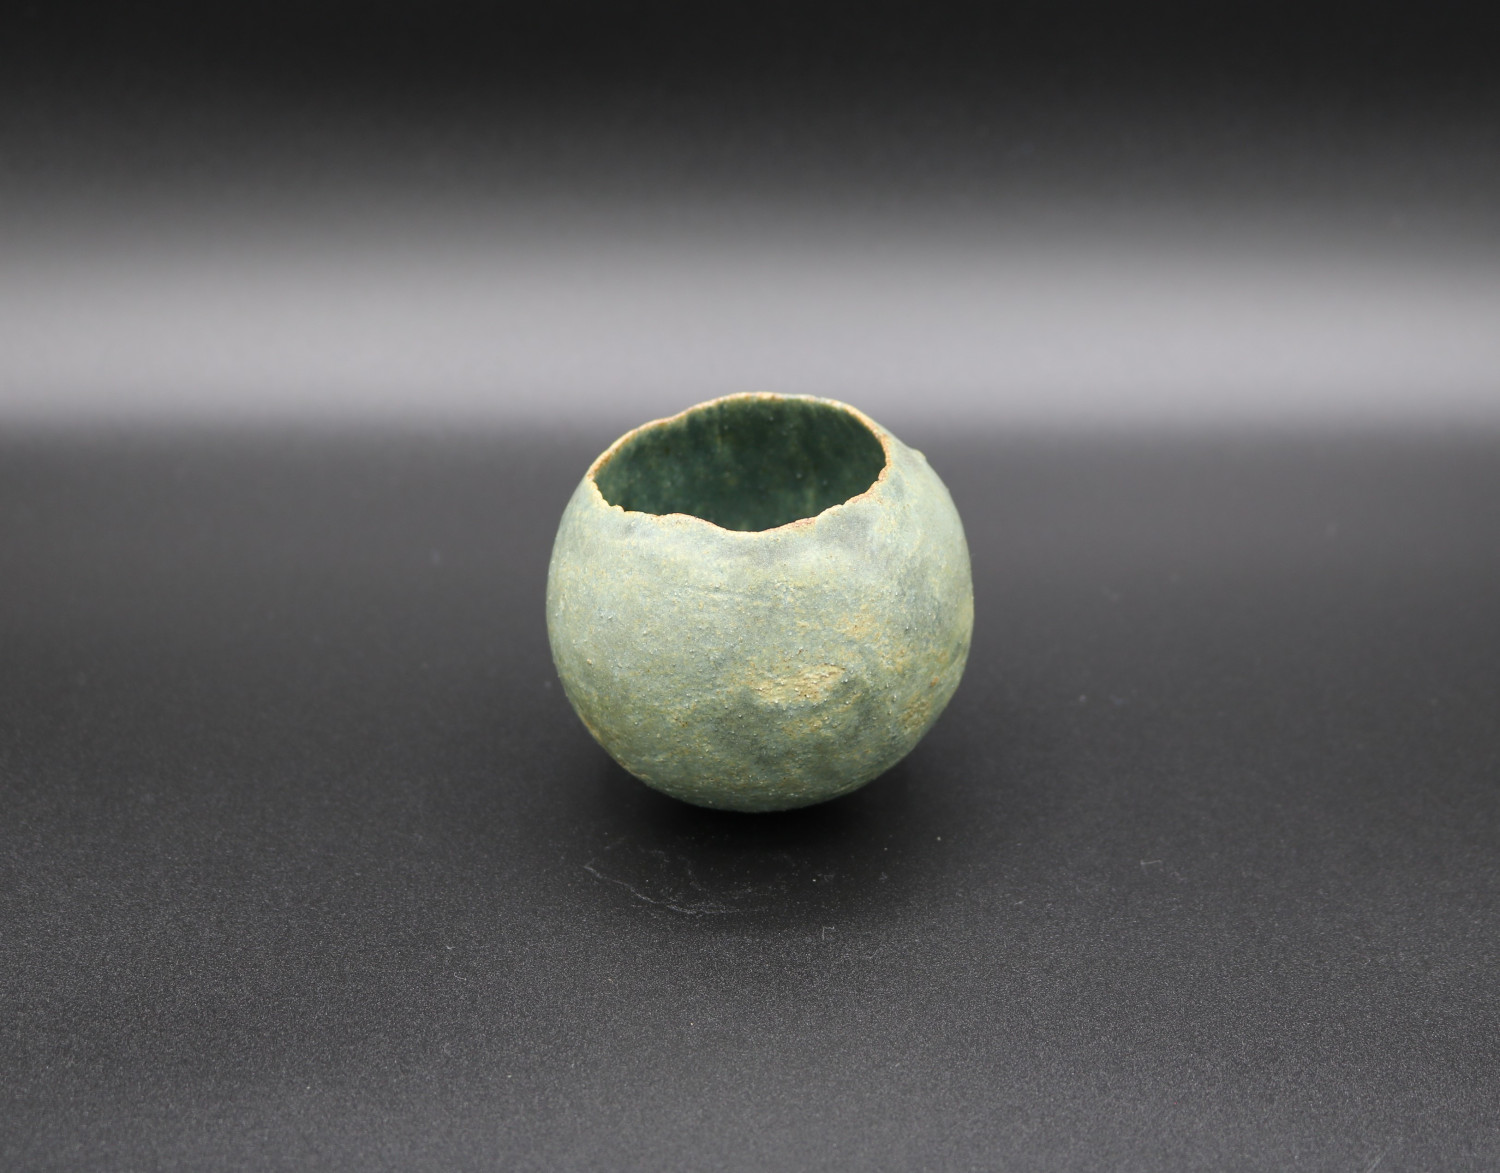 An Early Small Pinch Pot of Spherical Form